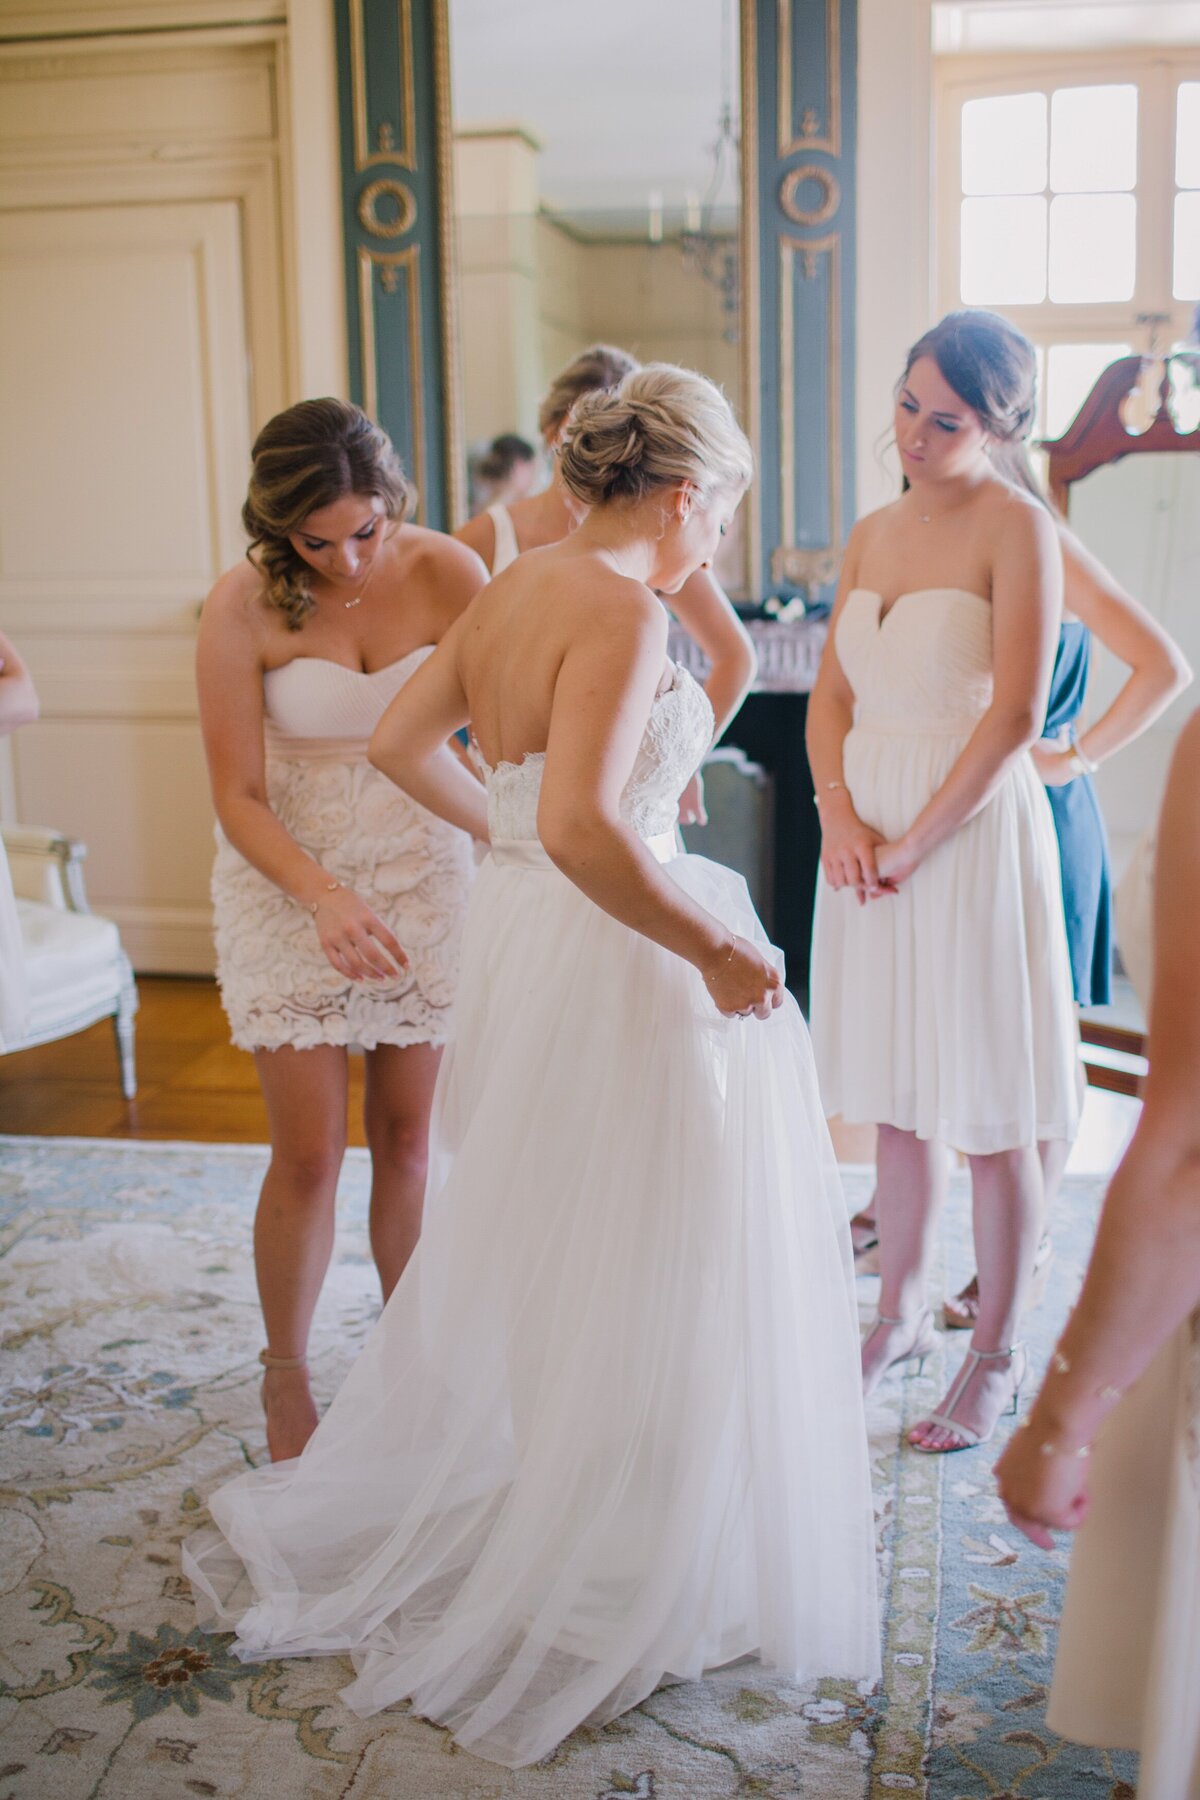 A wedding at Glen Manor House in Portsmouth, RI - 7